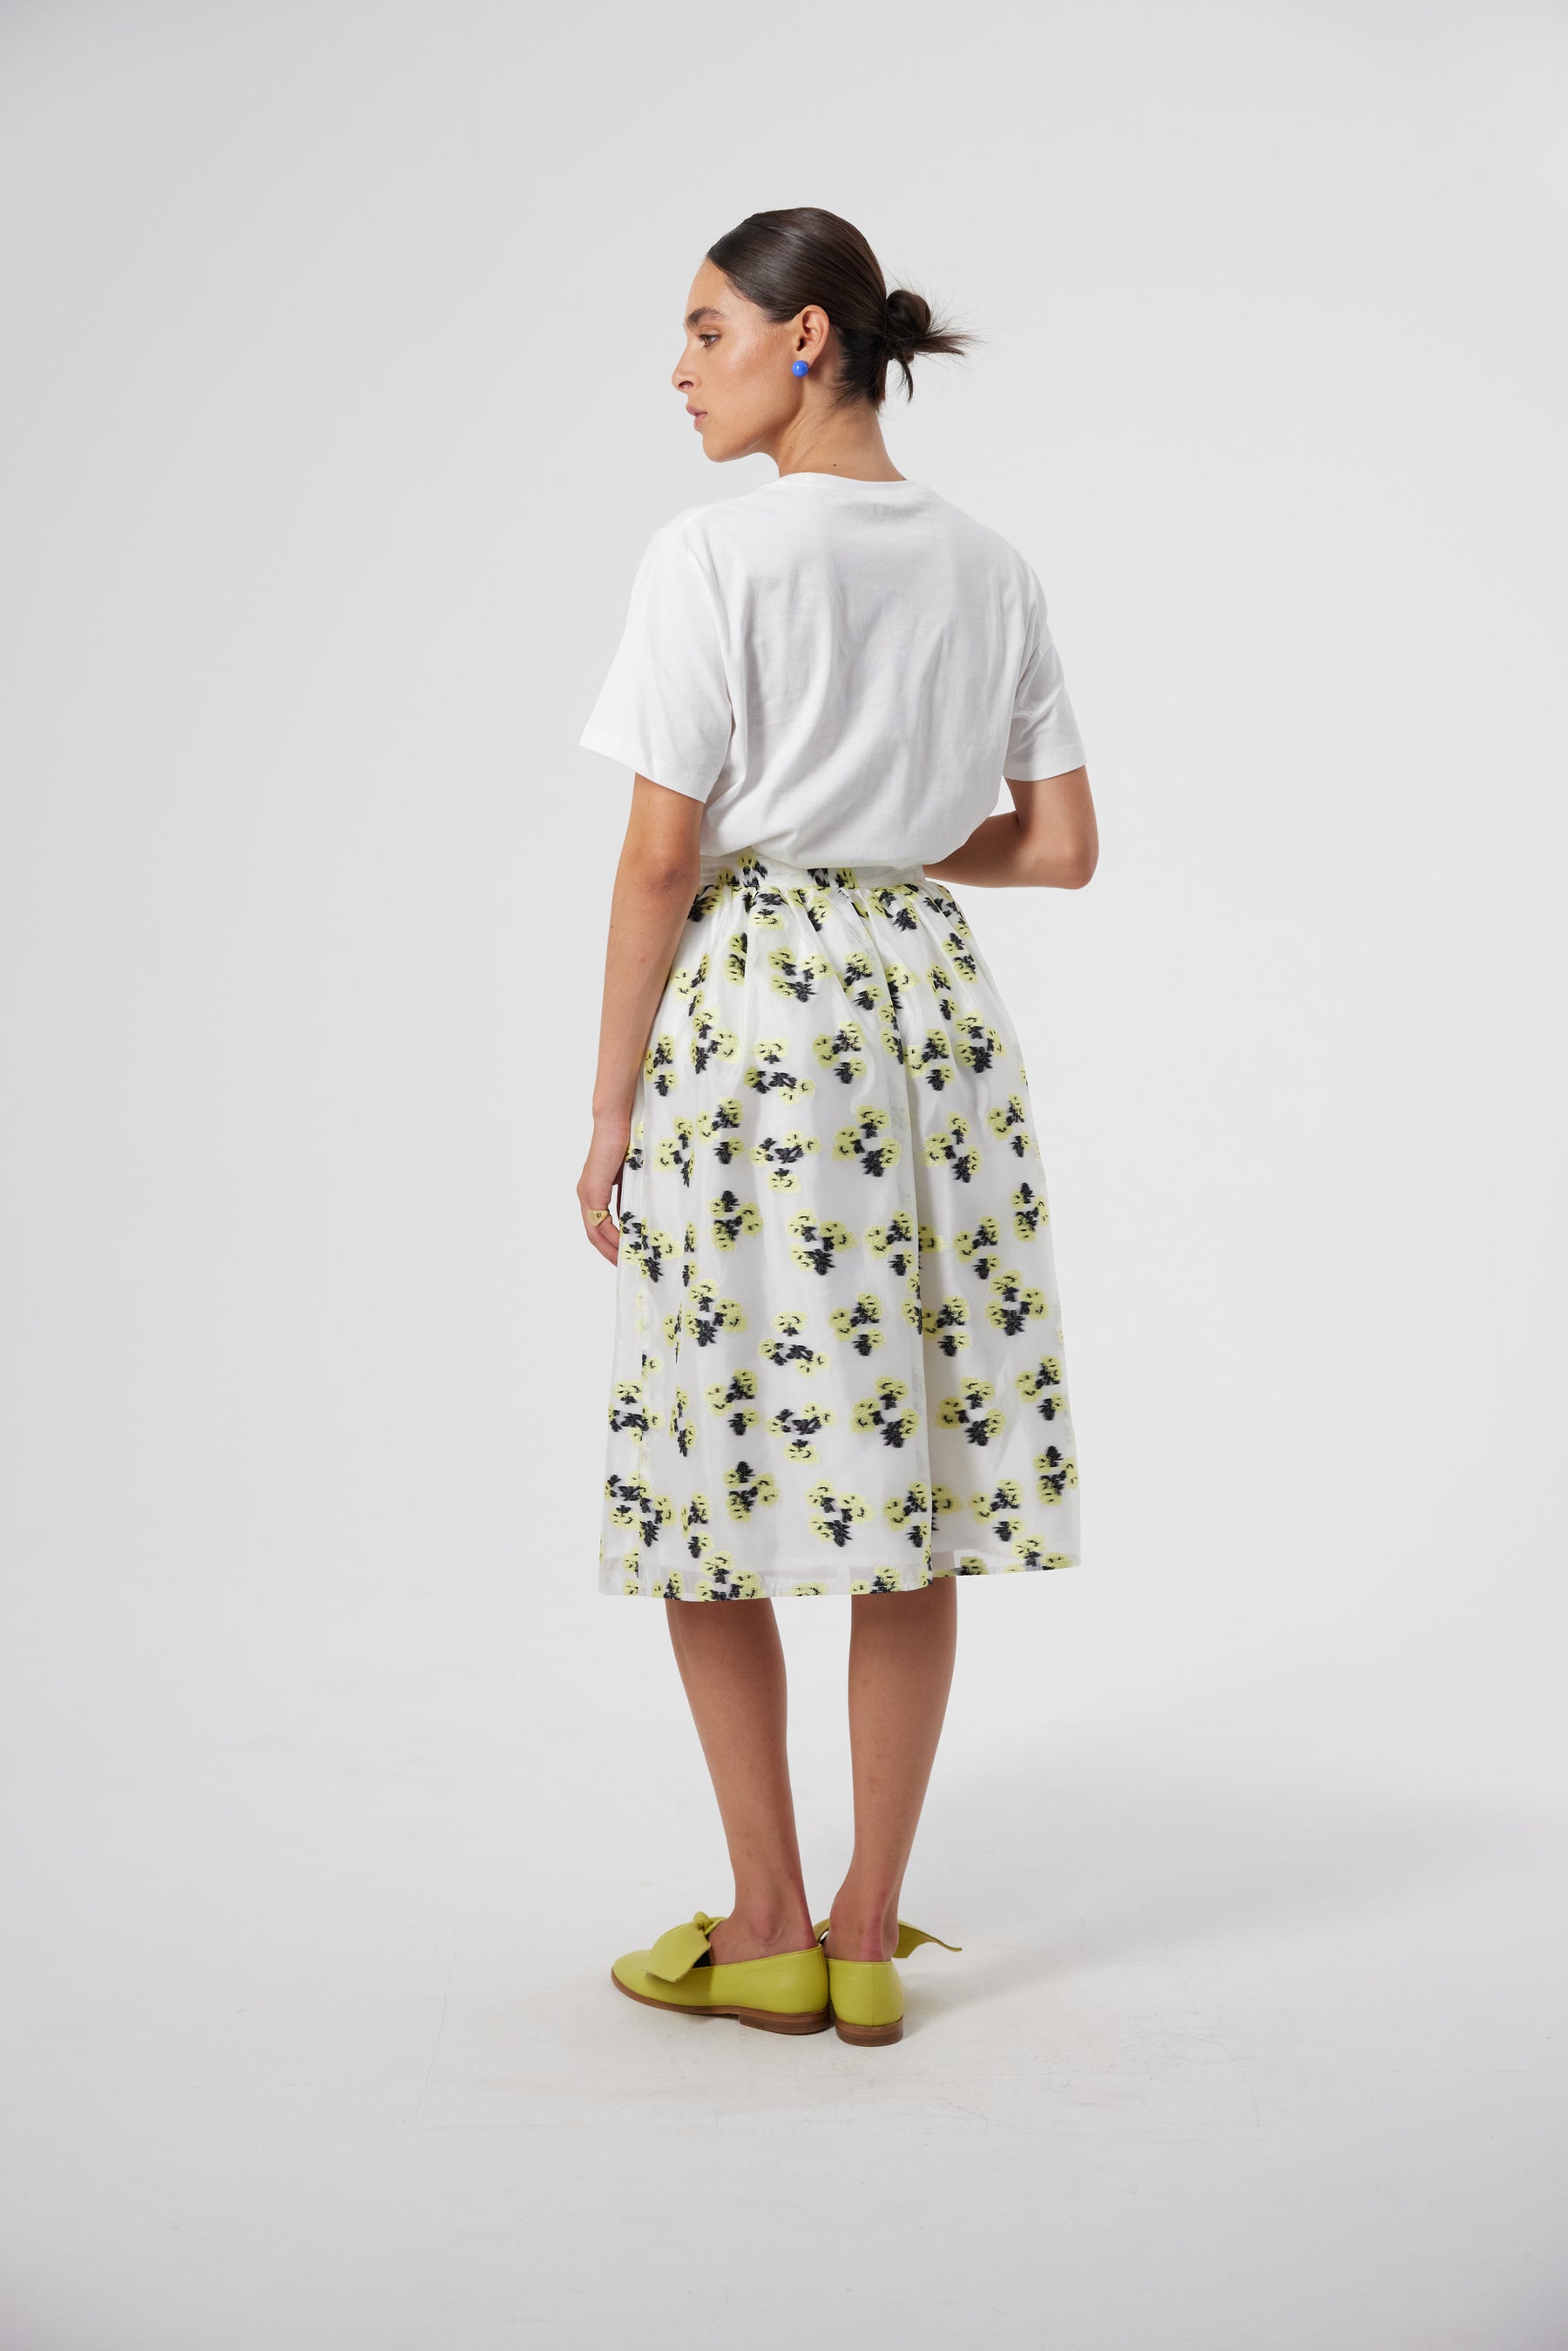 Orso skirt in Firefly embroidery